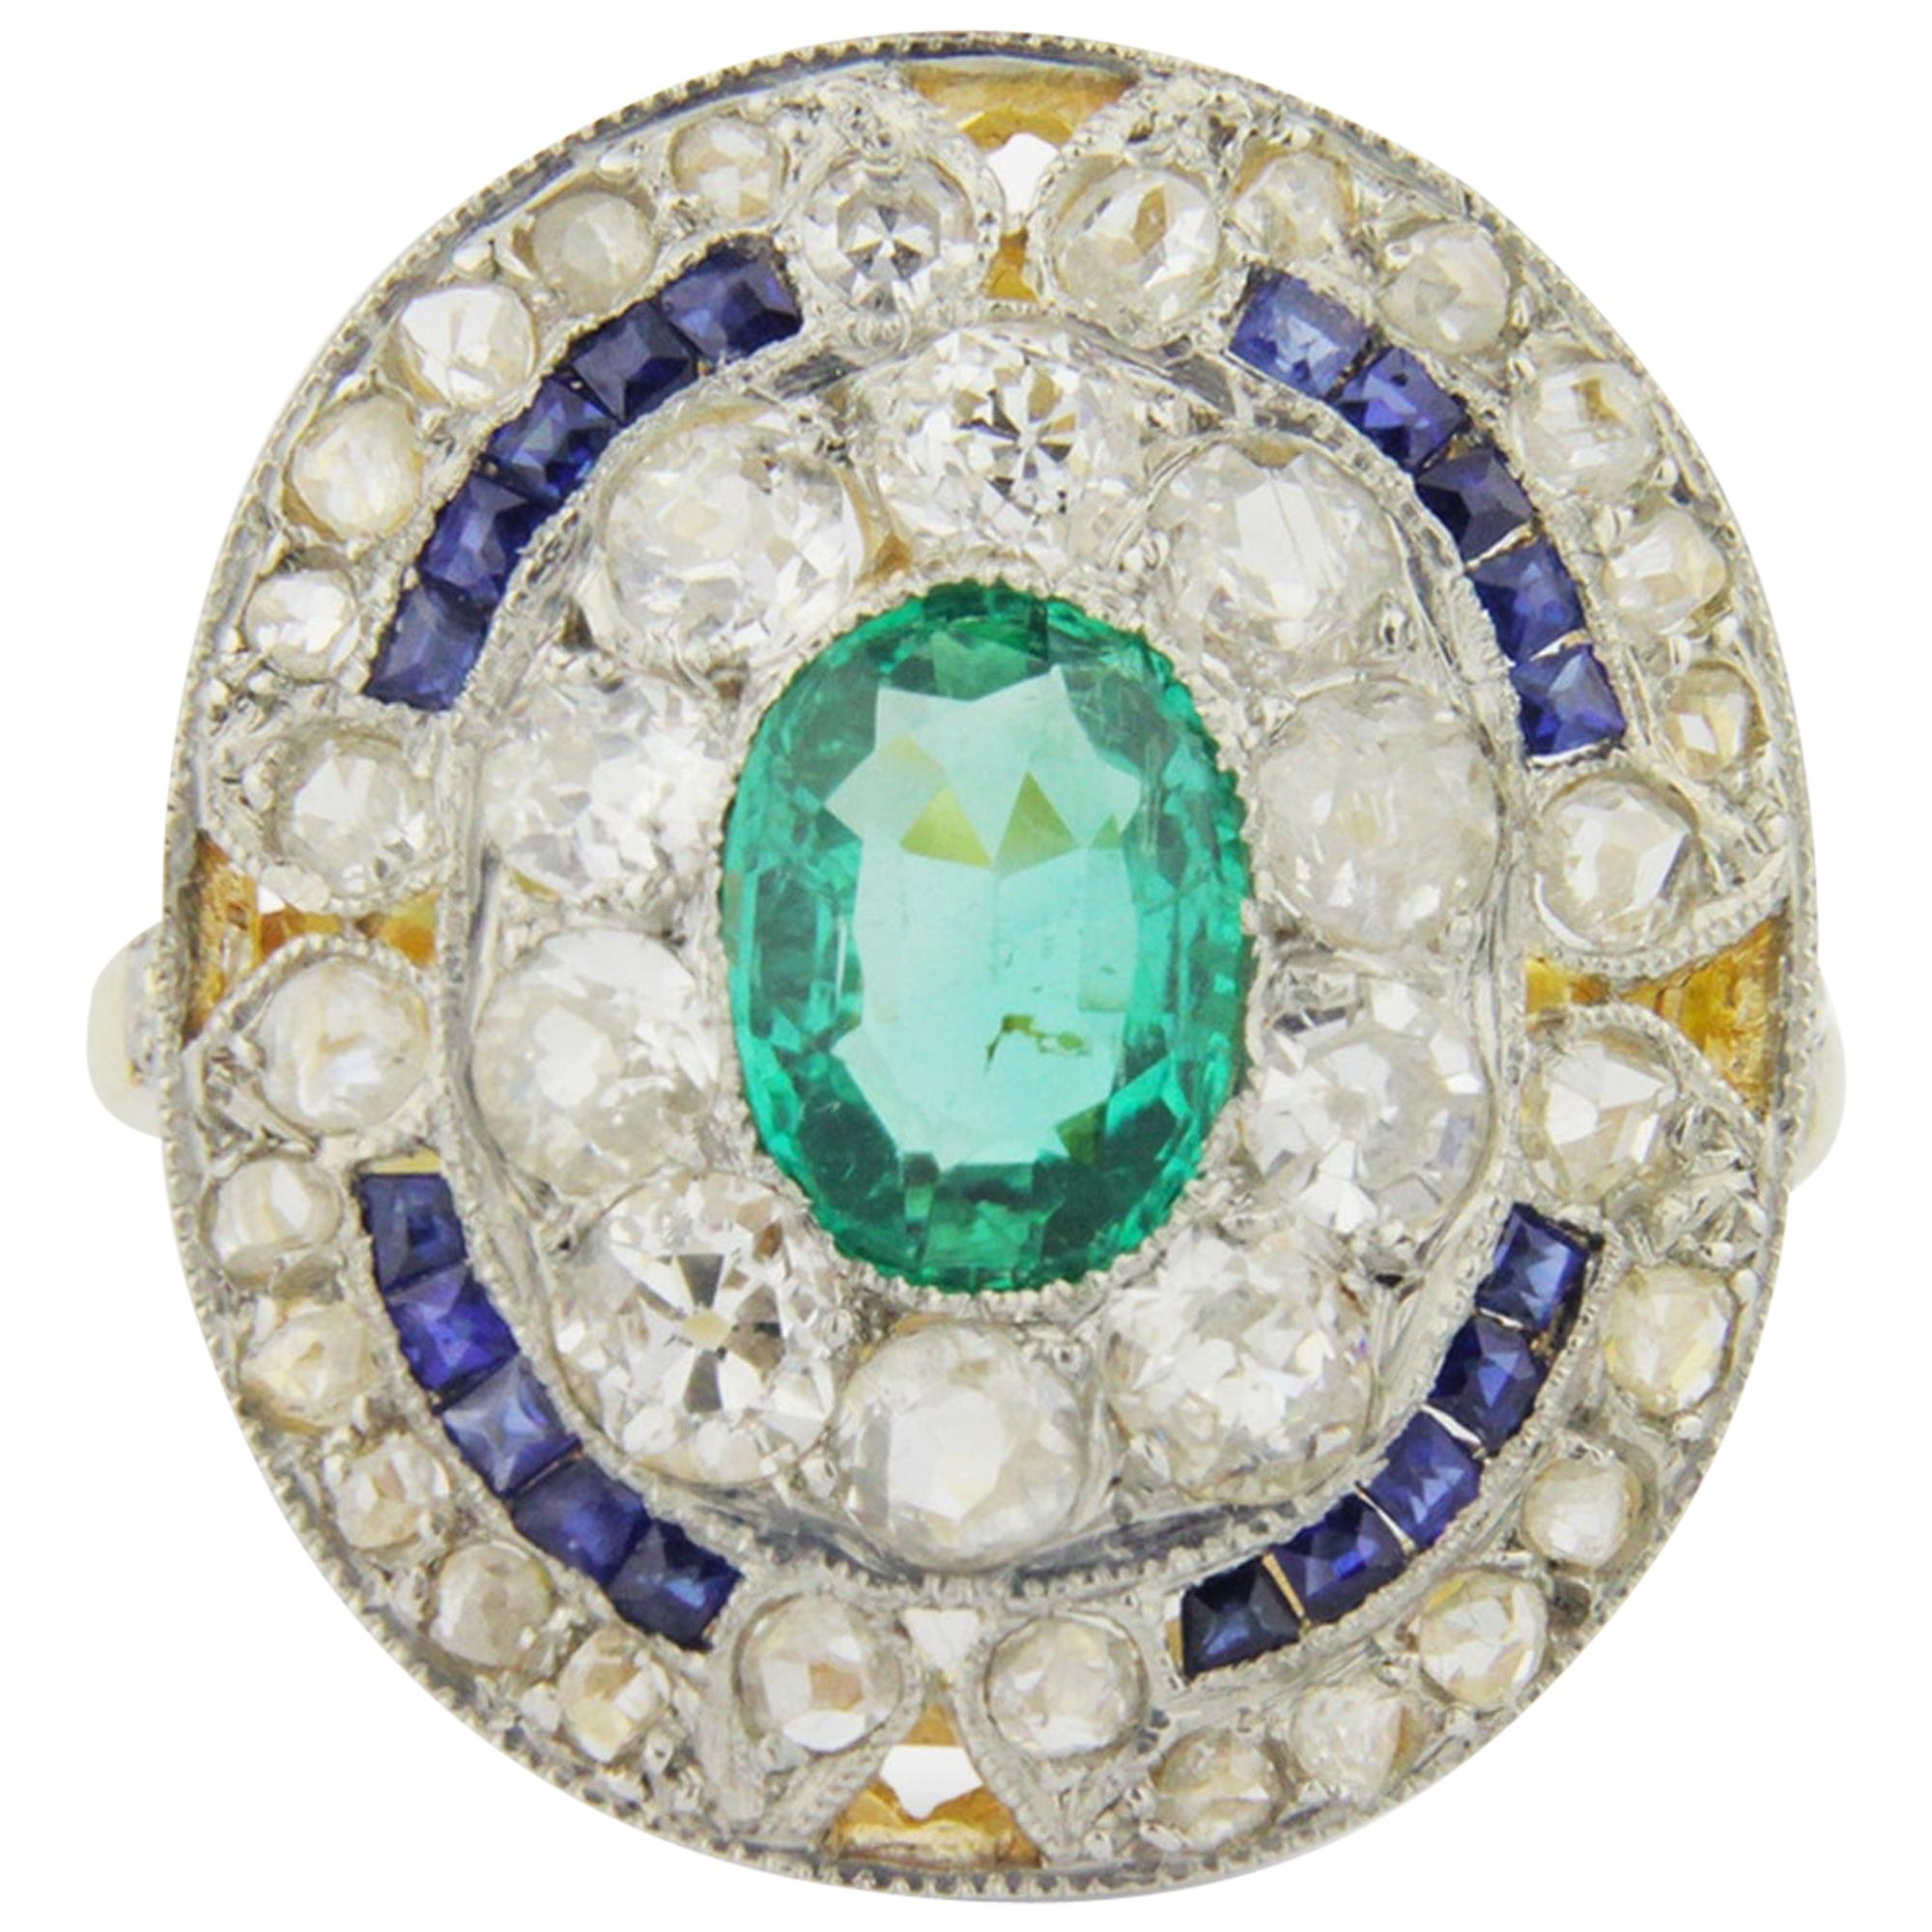 French Art Deco Cocktail Ring with an Emerald, Diamonds and Sapphires